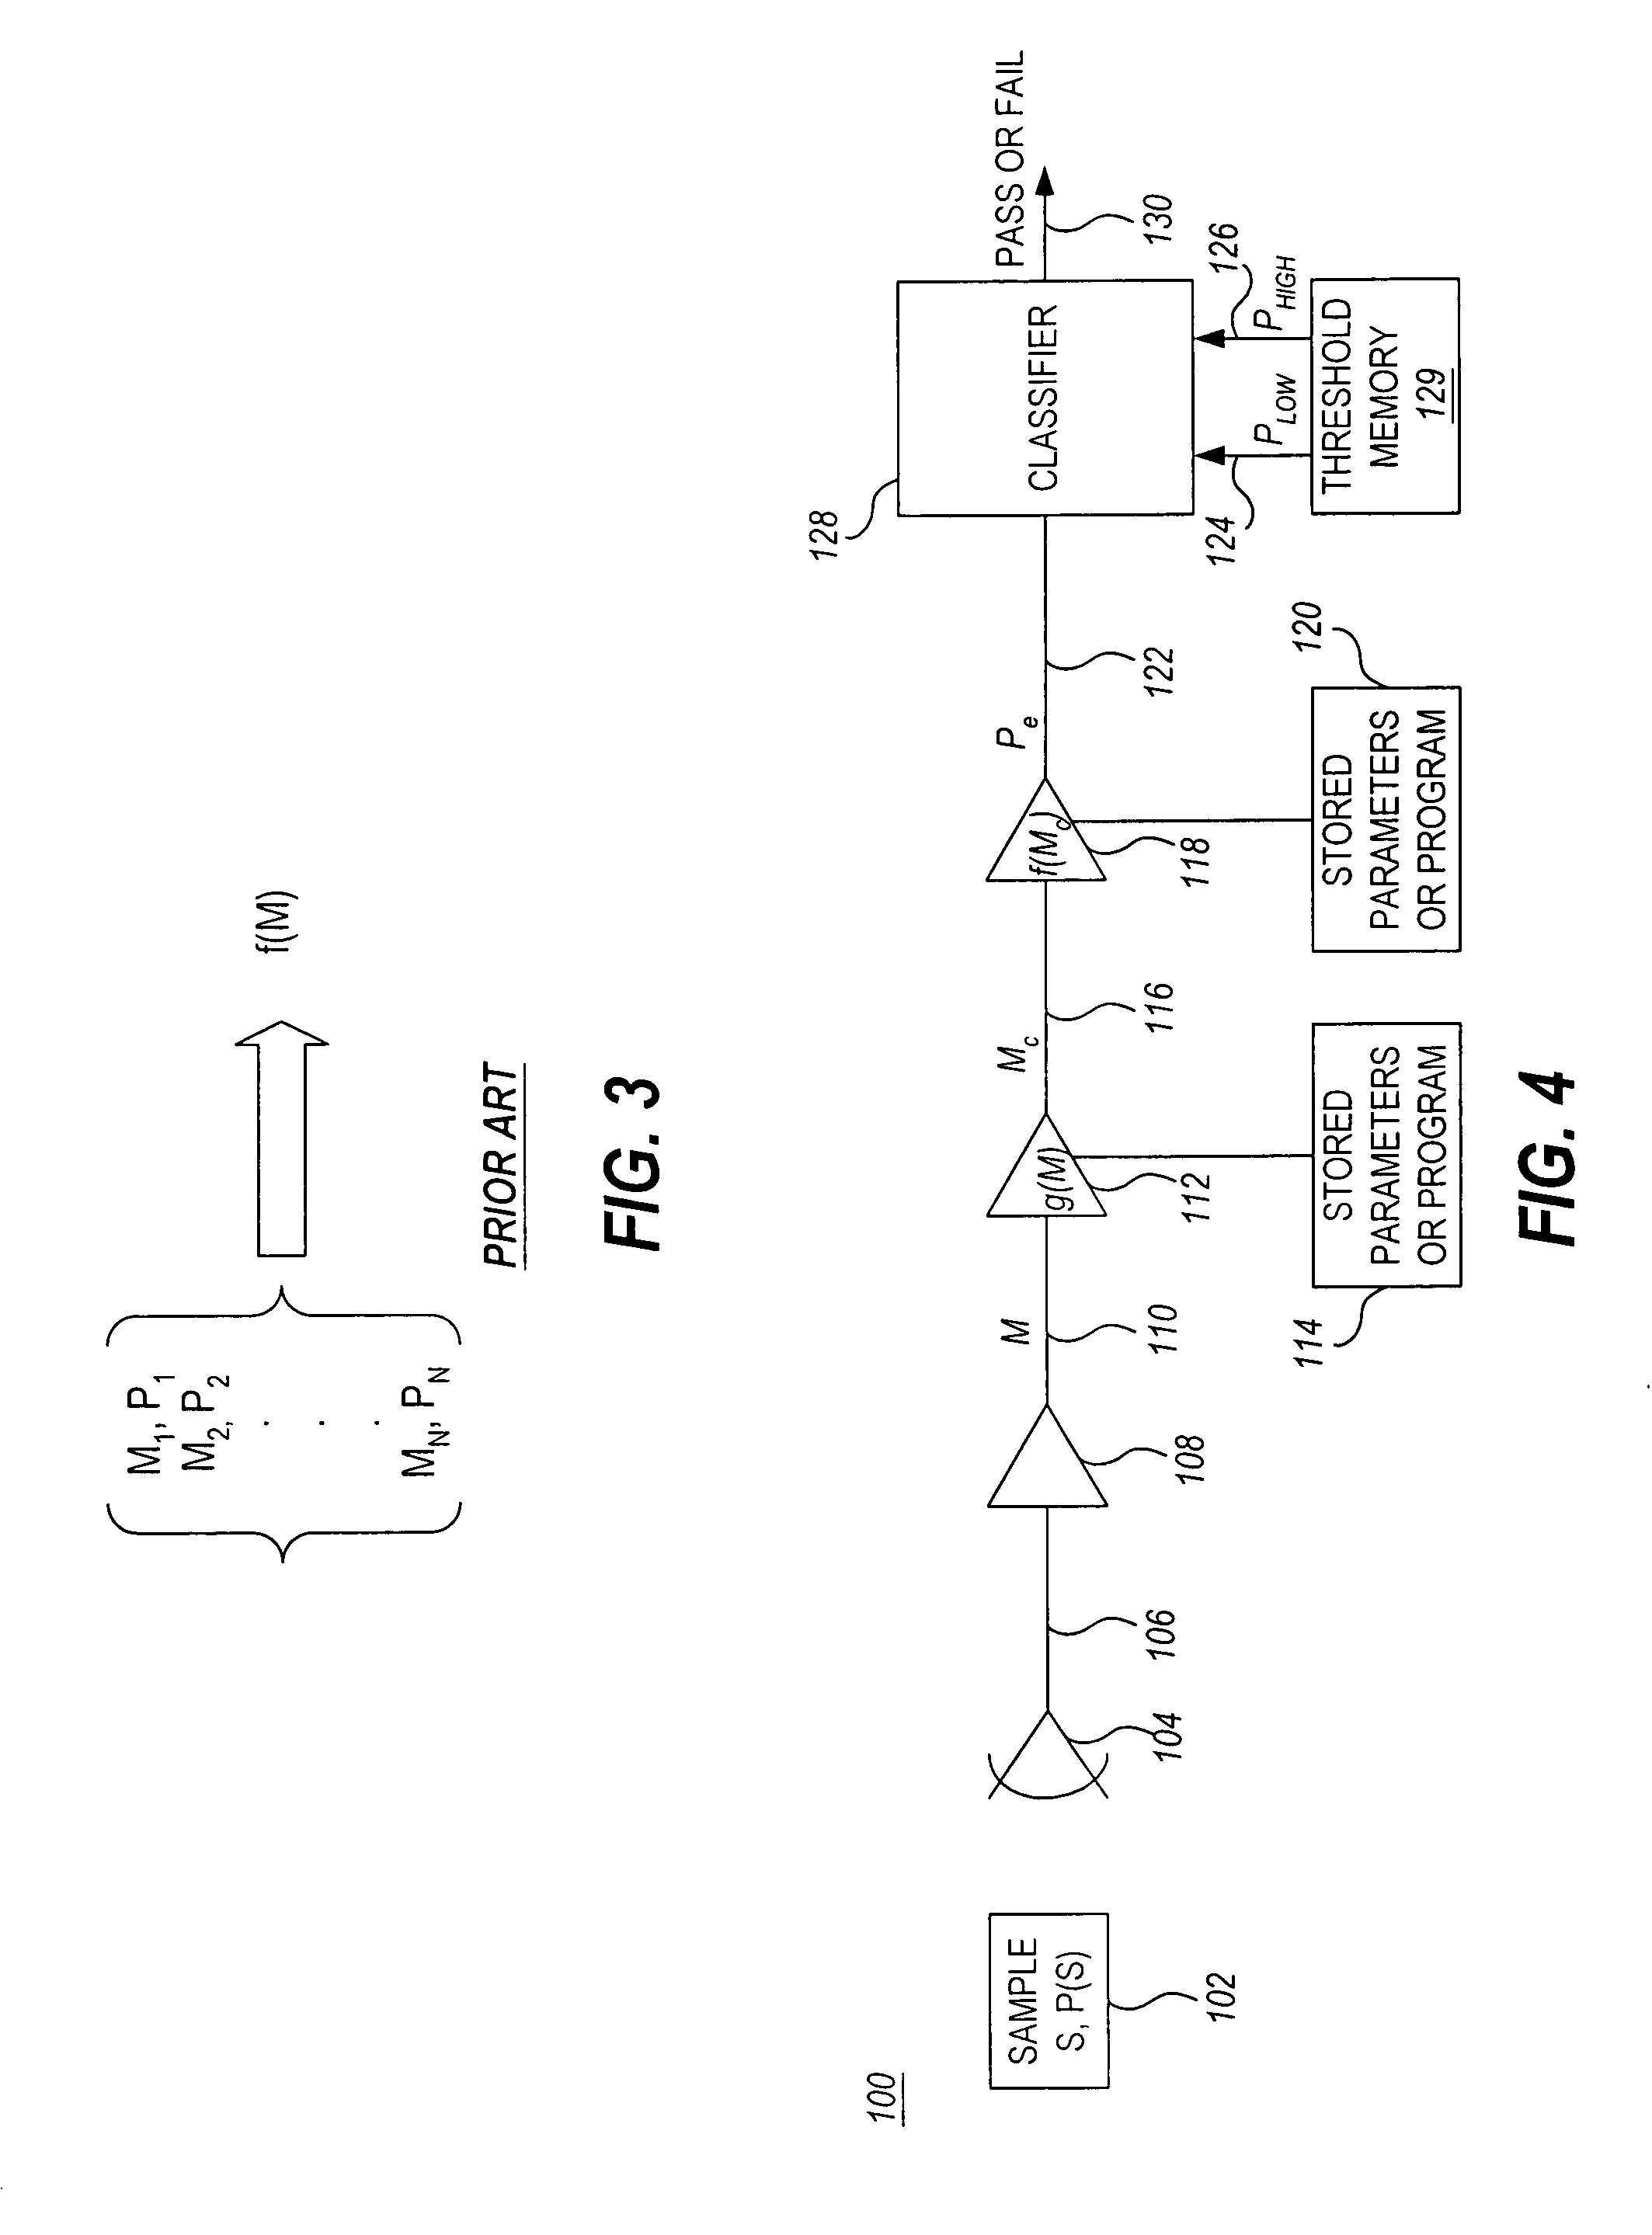 Method and apparatus for calibration of indirect measurement systems